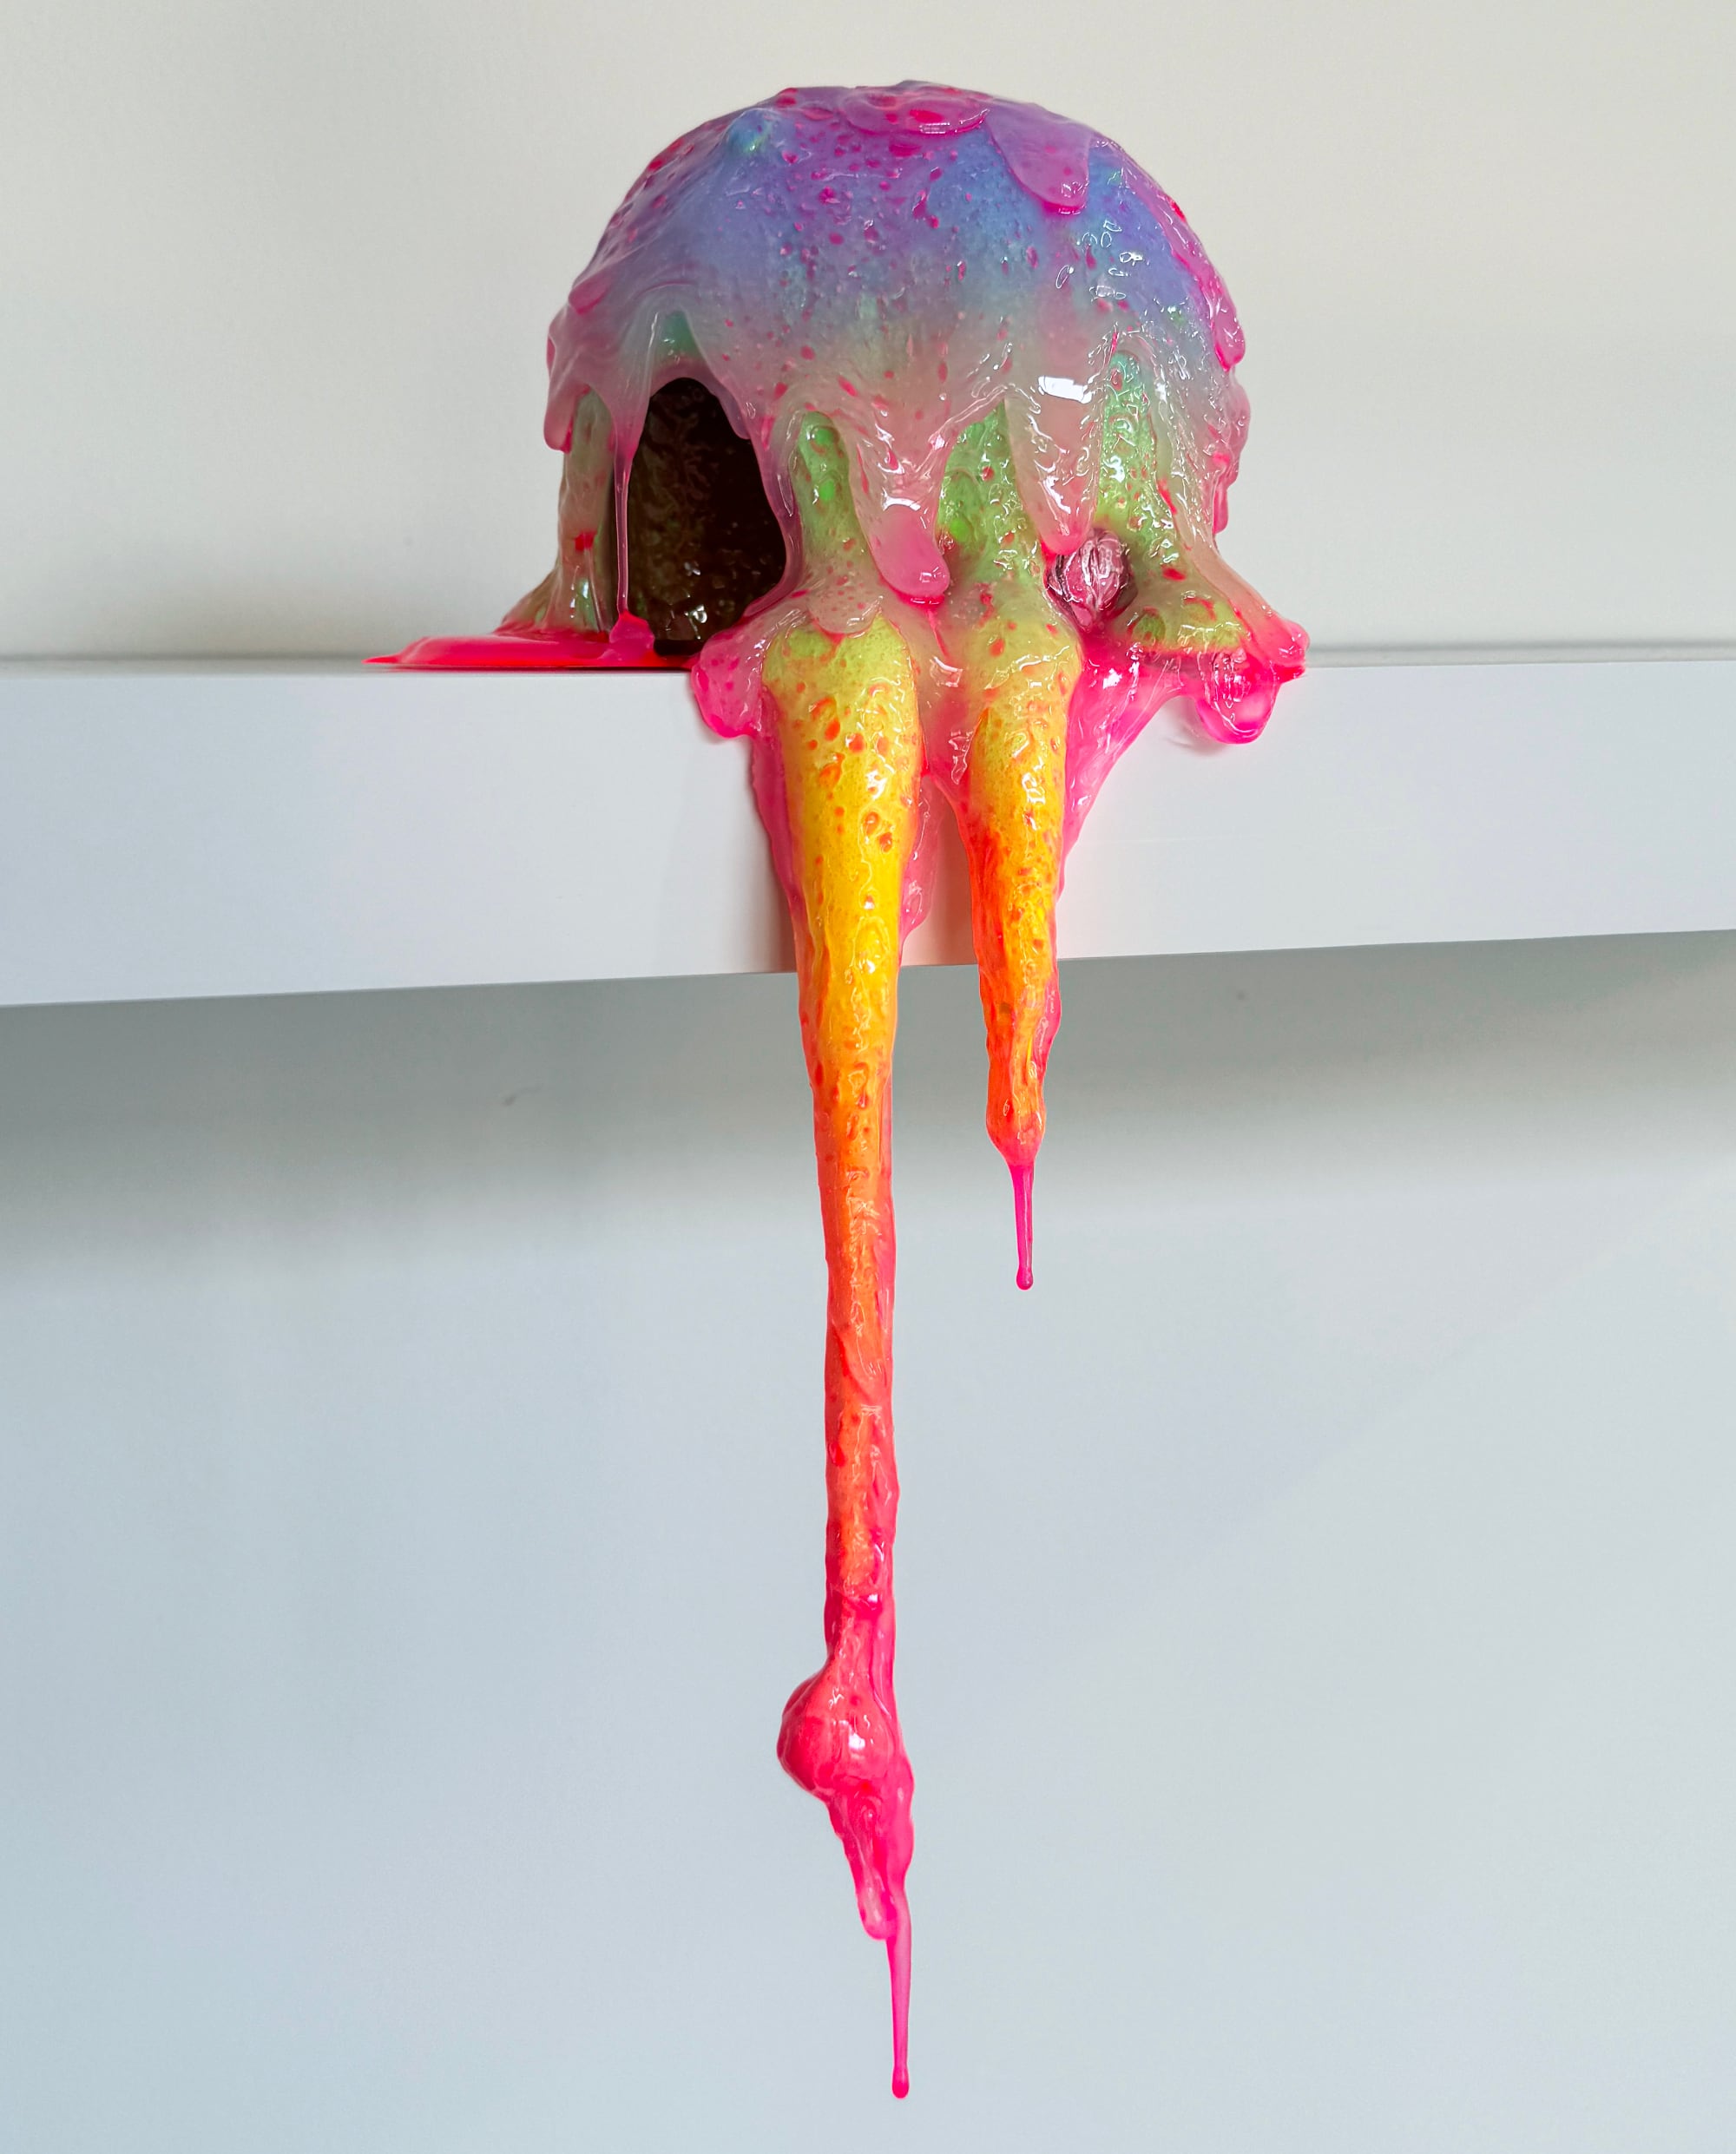 a gloopy technicolor sculpture that appears to drip over a shelf